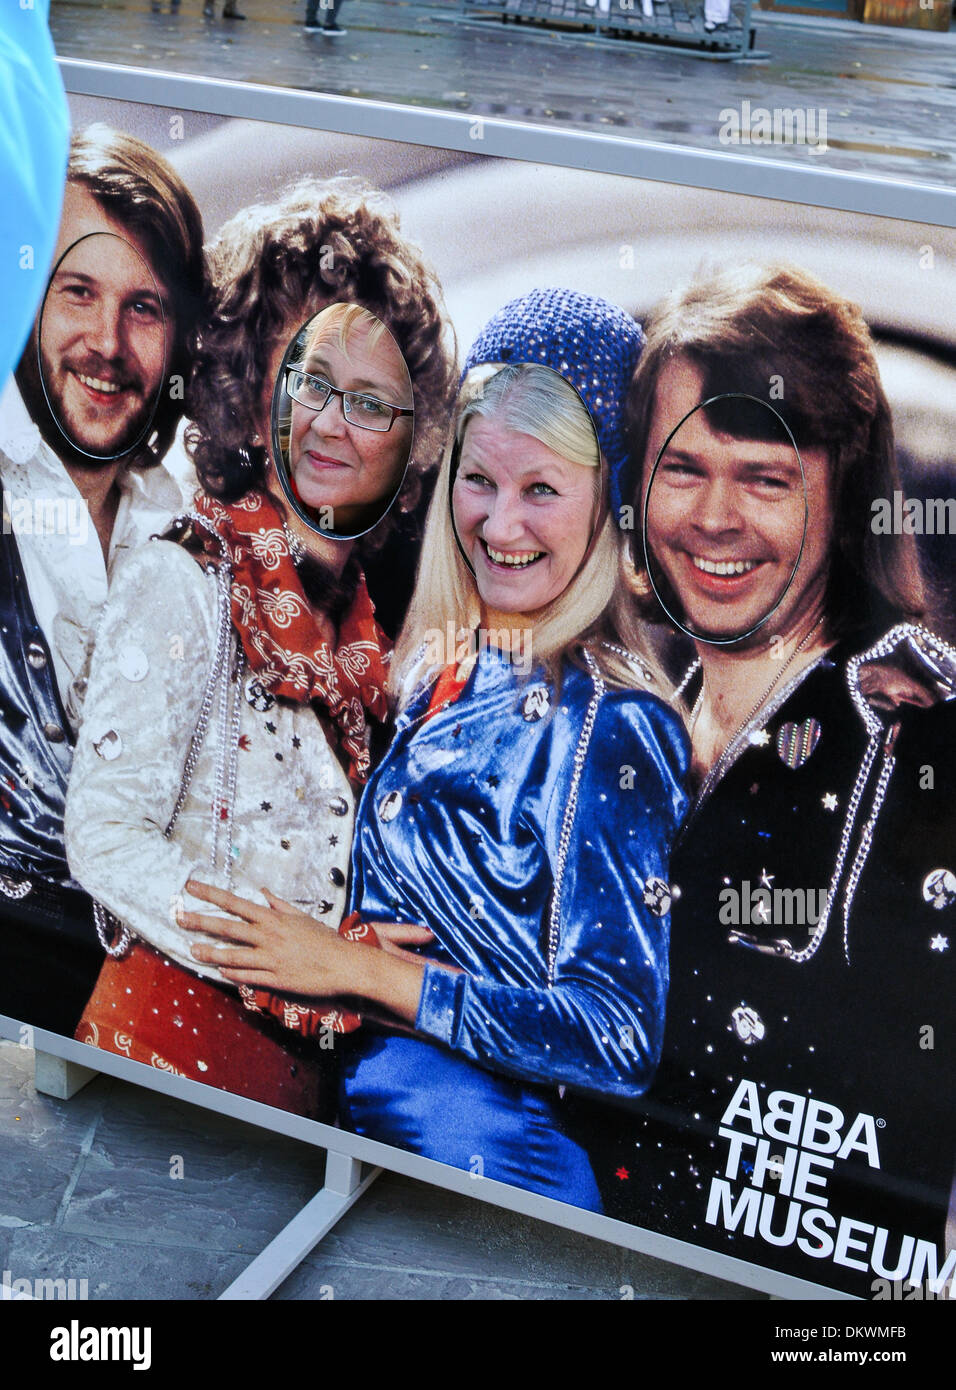 Stockholm, Sweden. 4th Oct, 2013. 15 October 2013, Stockholm, Sweden: In the short time since it's launch in May 2013 in excess of 170,000 visitors have flocked to ABBA - The Museum on Djurgard, in Stockholm, Sweden. No matter that the band hasn't released a new song in thirty years it remains a pop--music juggernaut. Here fans can gaze upon a wall full of gold records, the bands famously bejeweled costumes and more. At the highlight of the museum fans can go onstage and sing and dance with life-size animated figures of the band. Rob Schoenbaum/POLARIS (Credit Image: © Rob Schoenbaum/ZUM Stock Photo